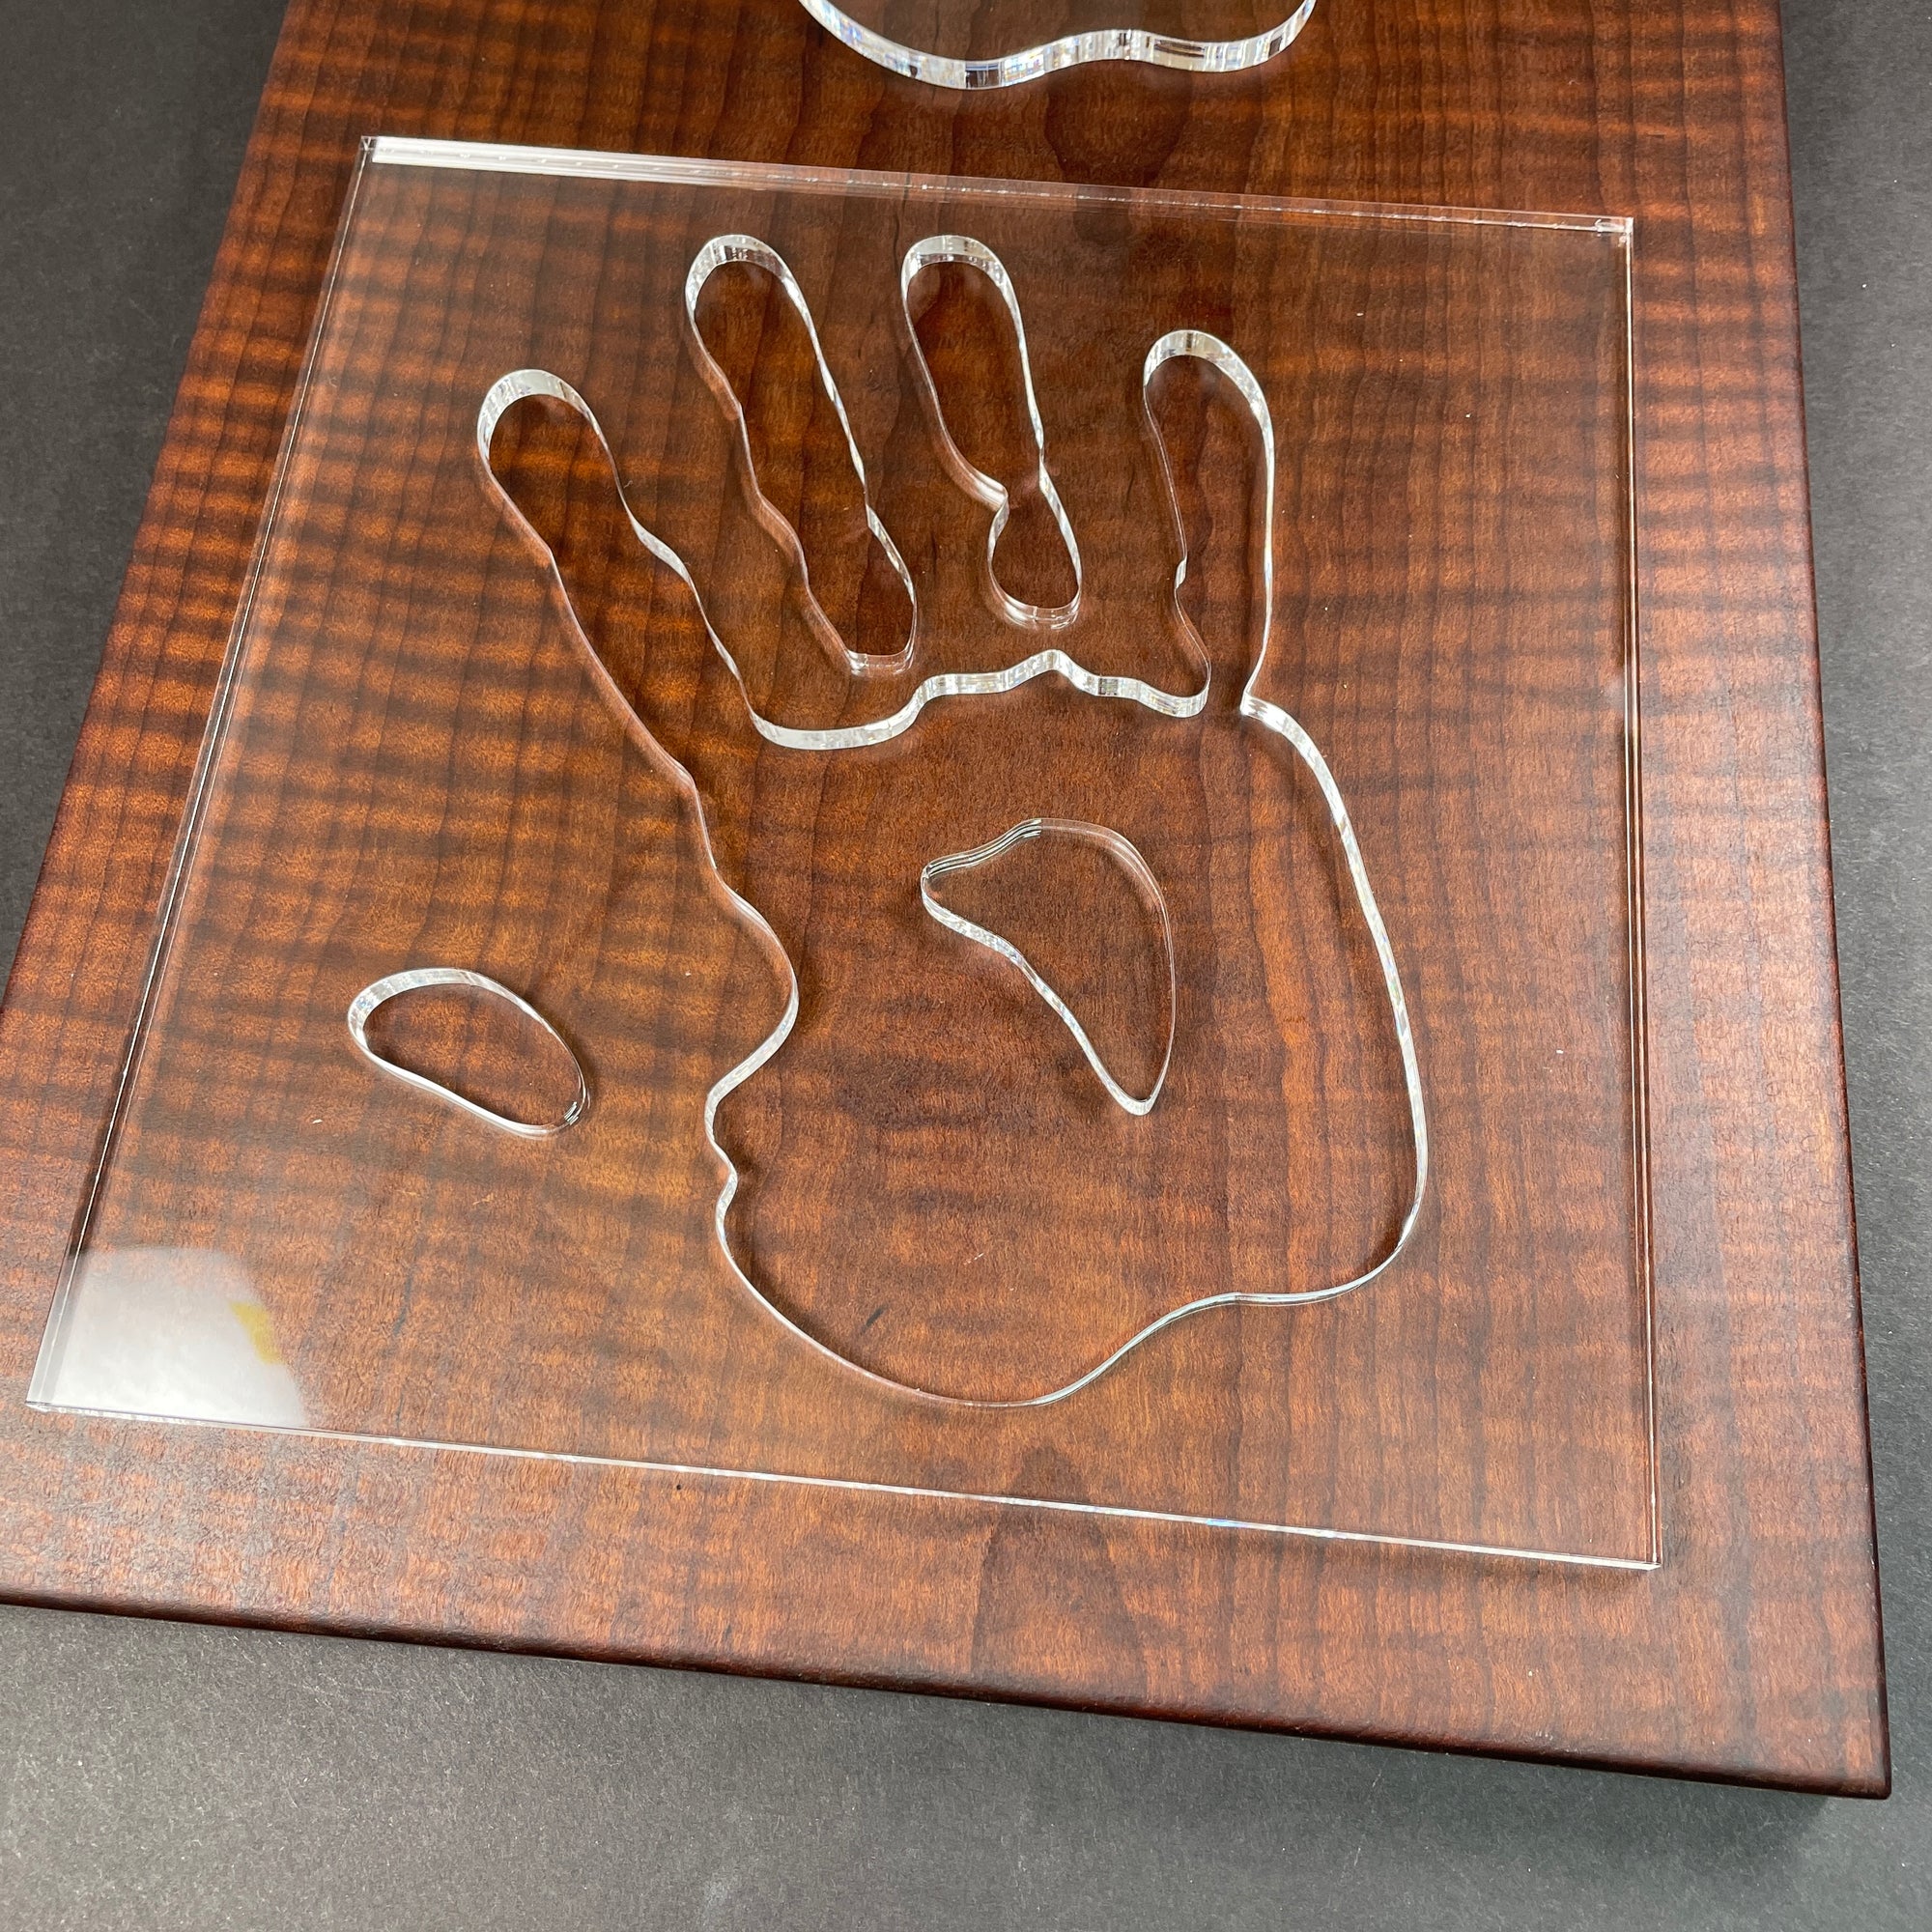 Hand Print Router Template